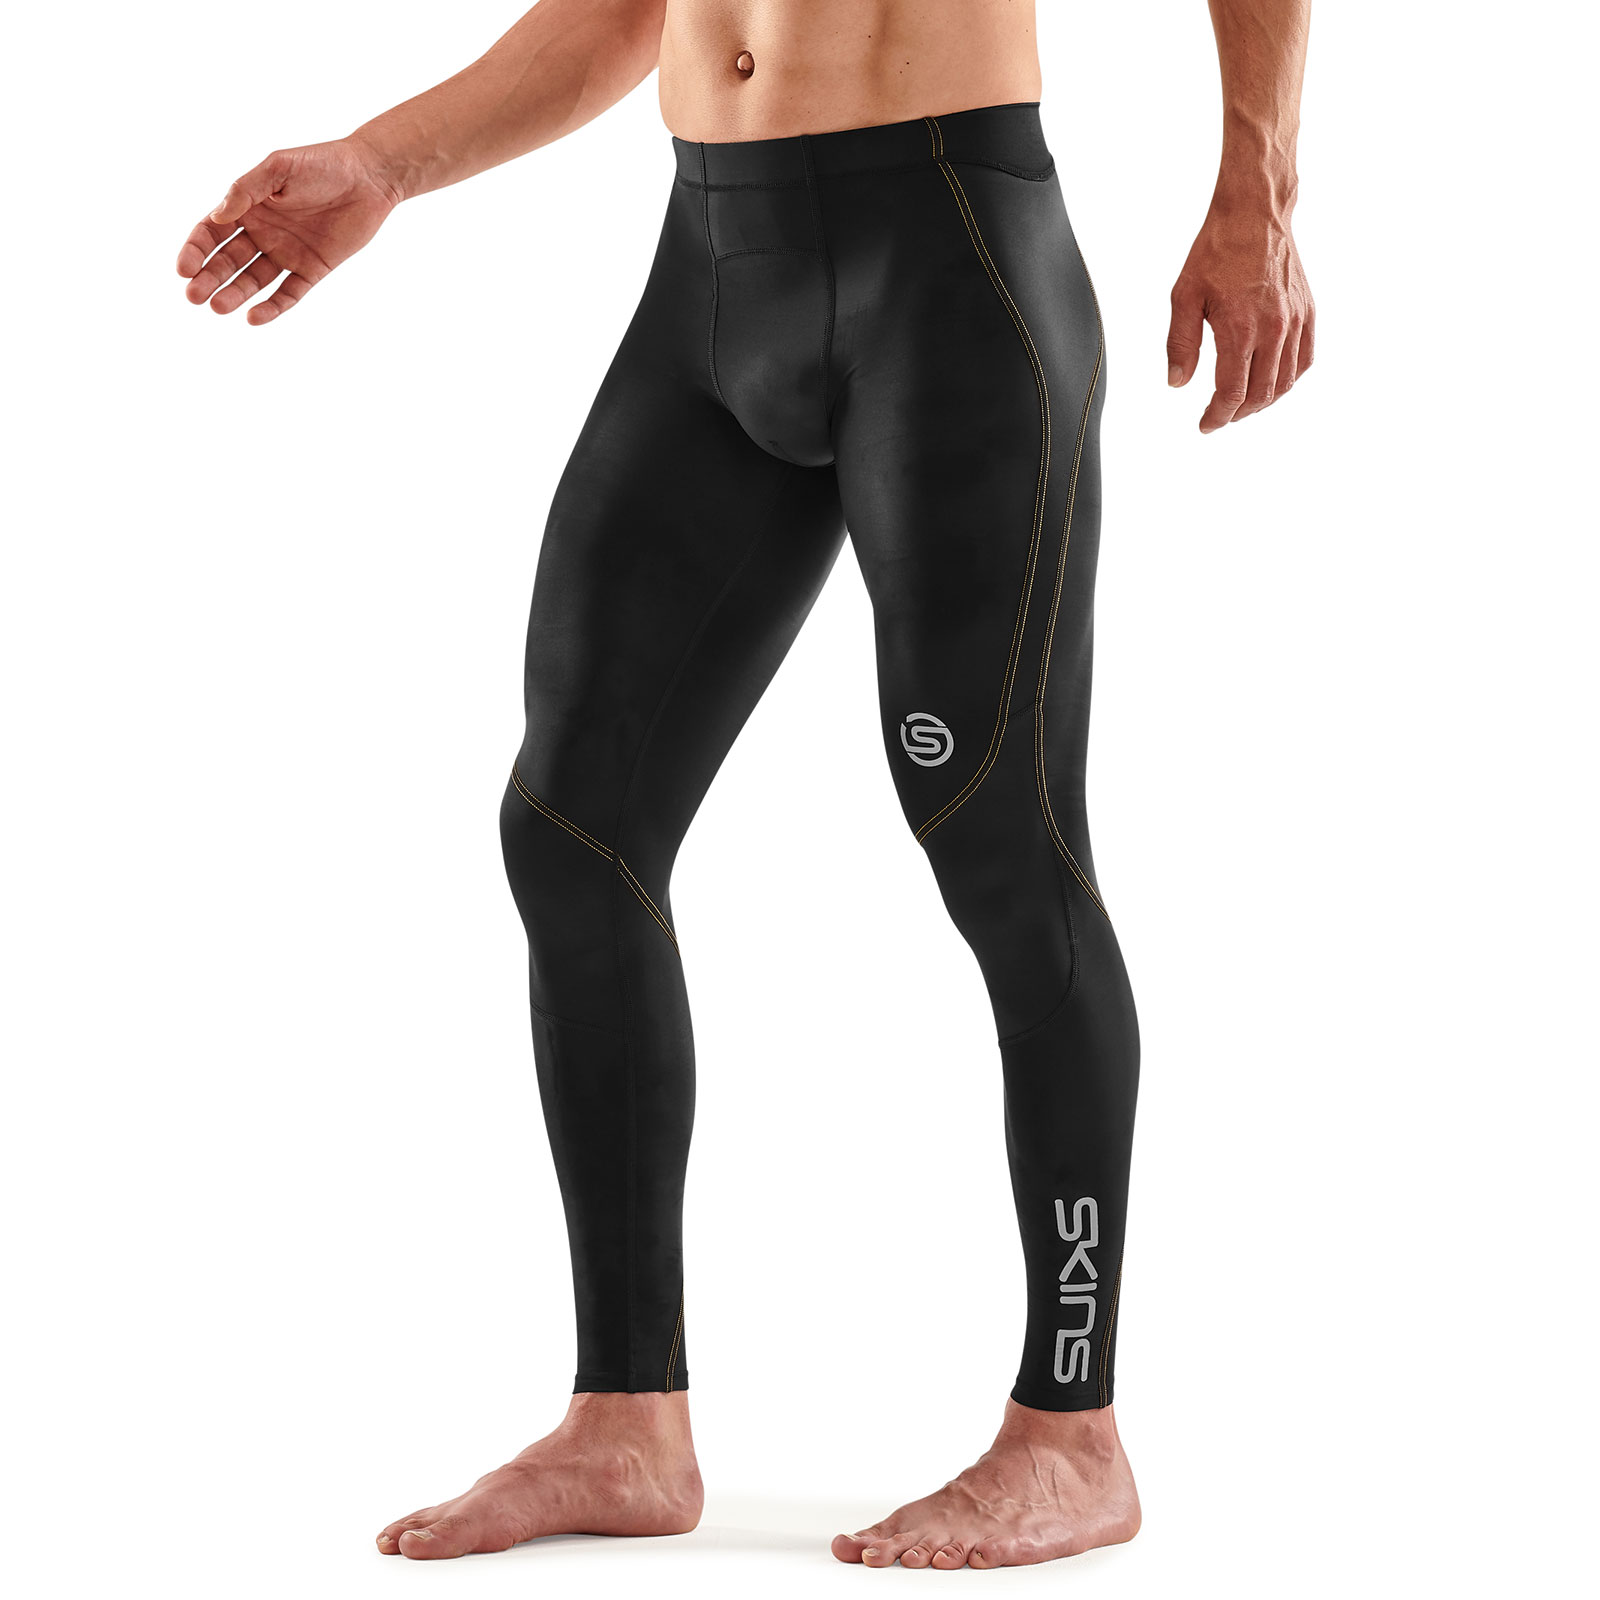 SKINS A400 Compression Tights Review  Skins compression, Race review,  Compression tights